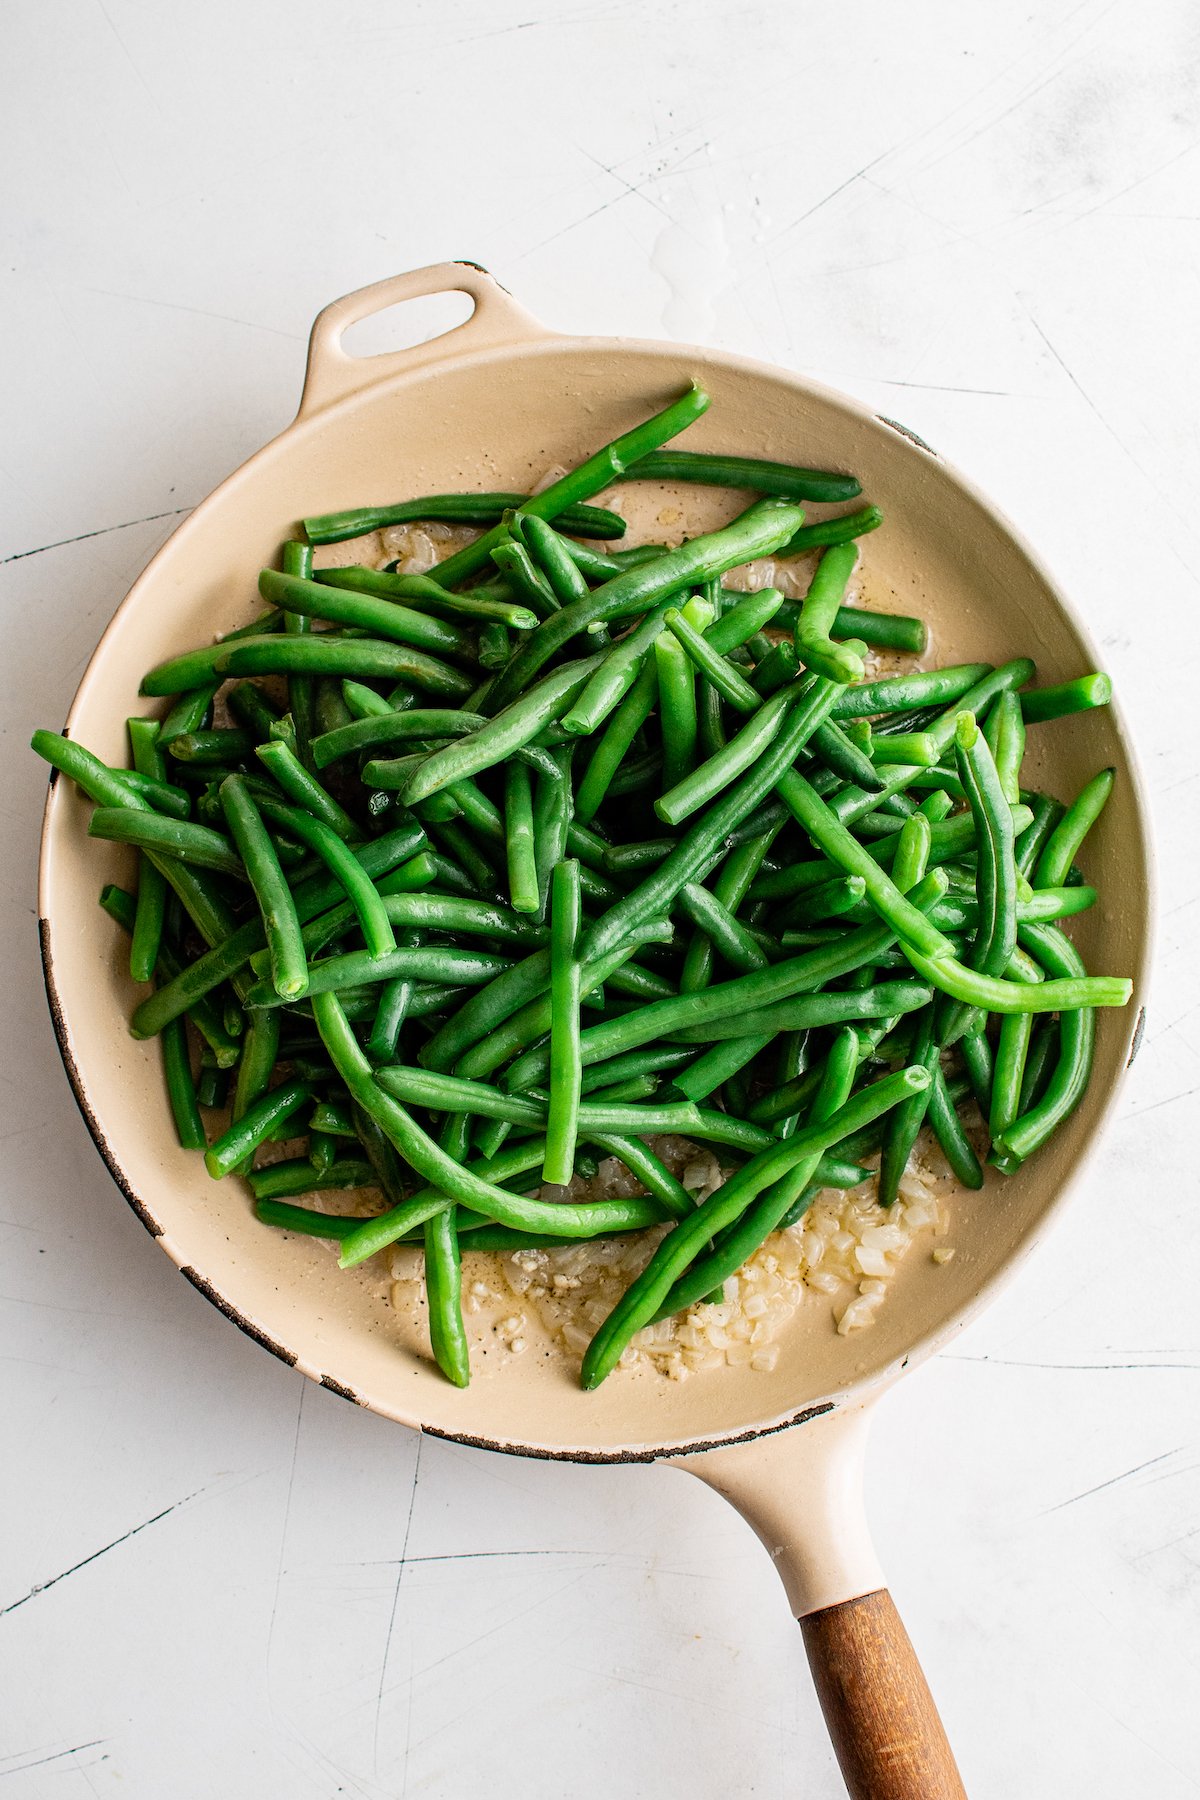 Green beans in a skillet with onions, butter, and other ingredients.